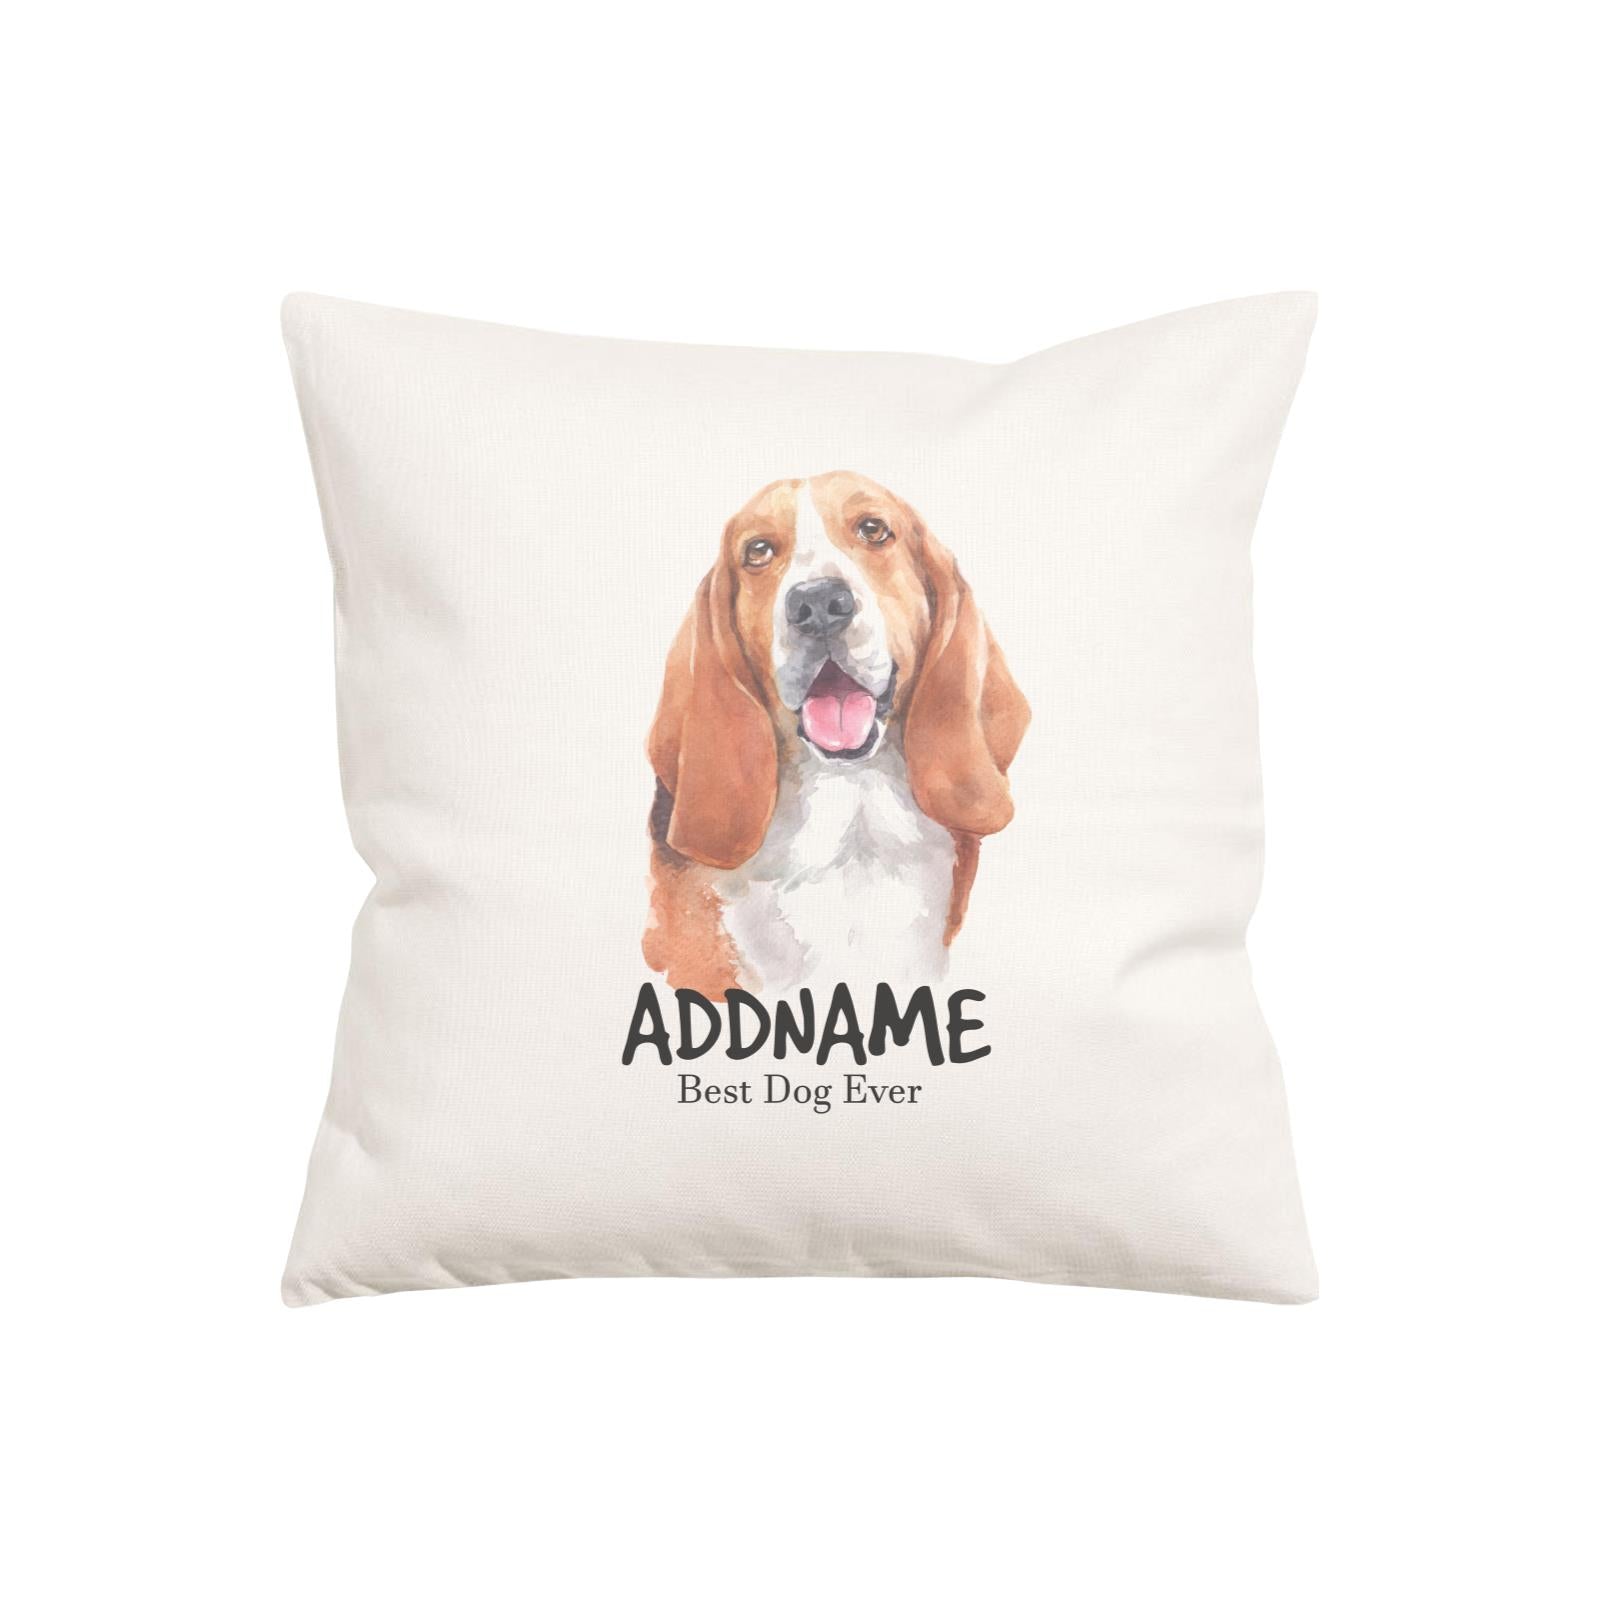 Watercolor Dog Series Basset Hound Happy Best Dog Ever Addname Pillow Cushion